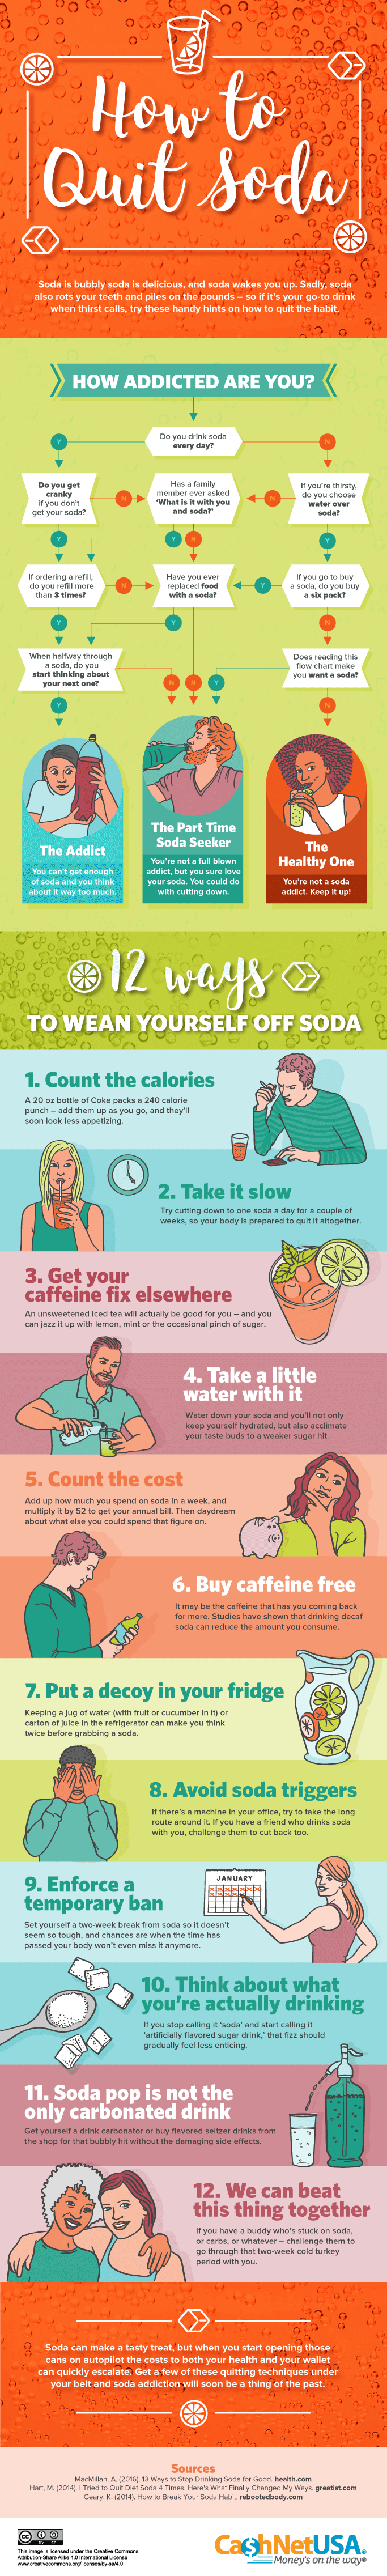 here's how to quit soda through 12 ways to wean